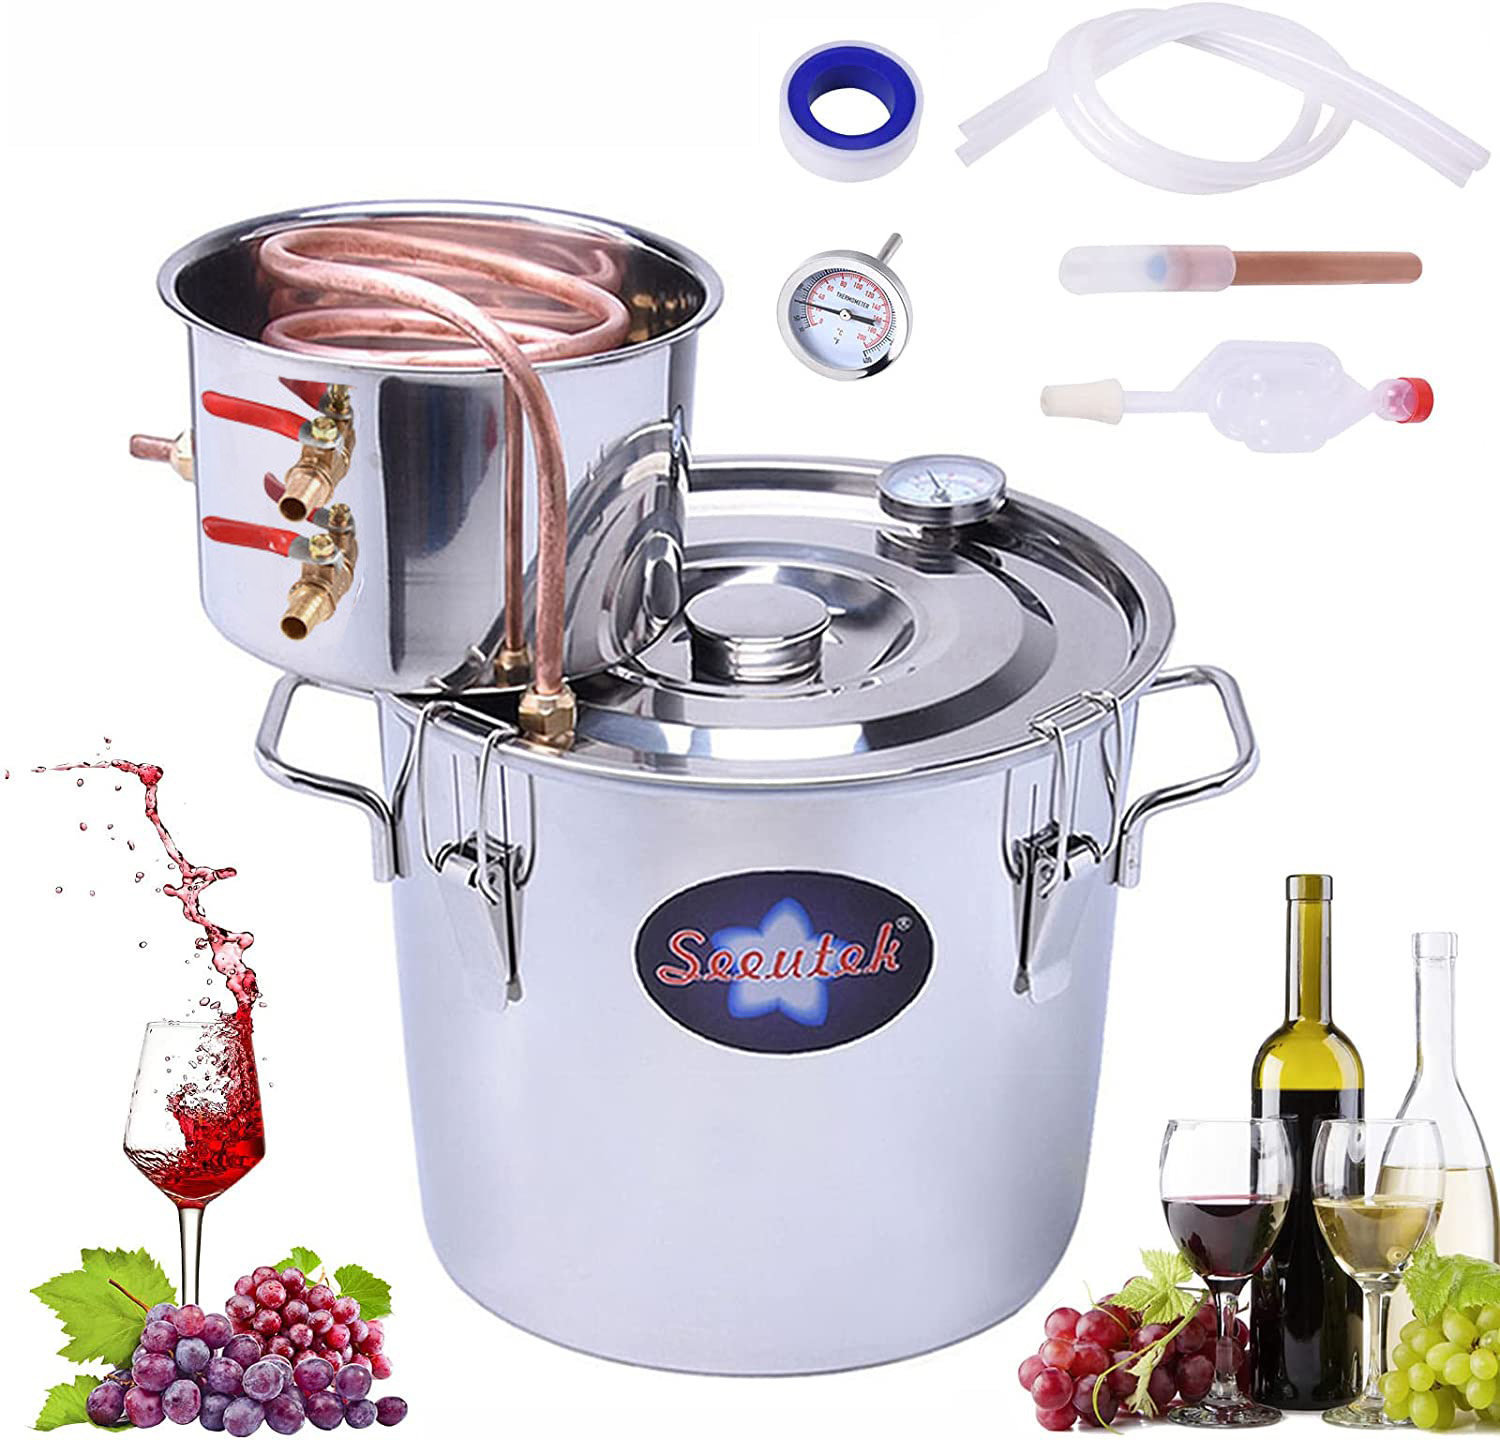 VEVOR Alcohol Still 3Gal/12L Alcohol Distiller Stainless Steel Distillery  Kit for Alcohol With Copper Tube & Pump Home Brewing Kit Build-in